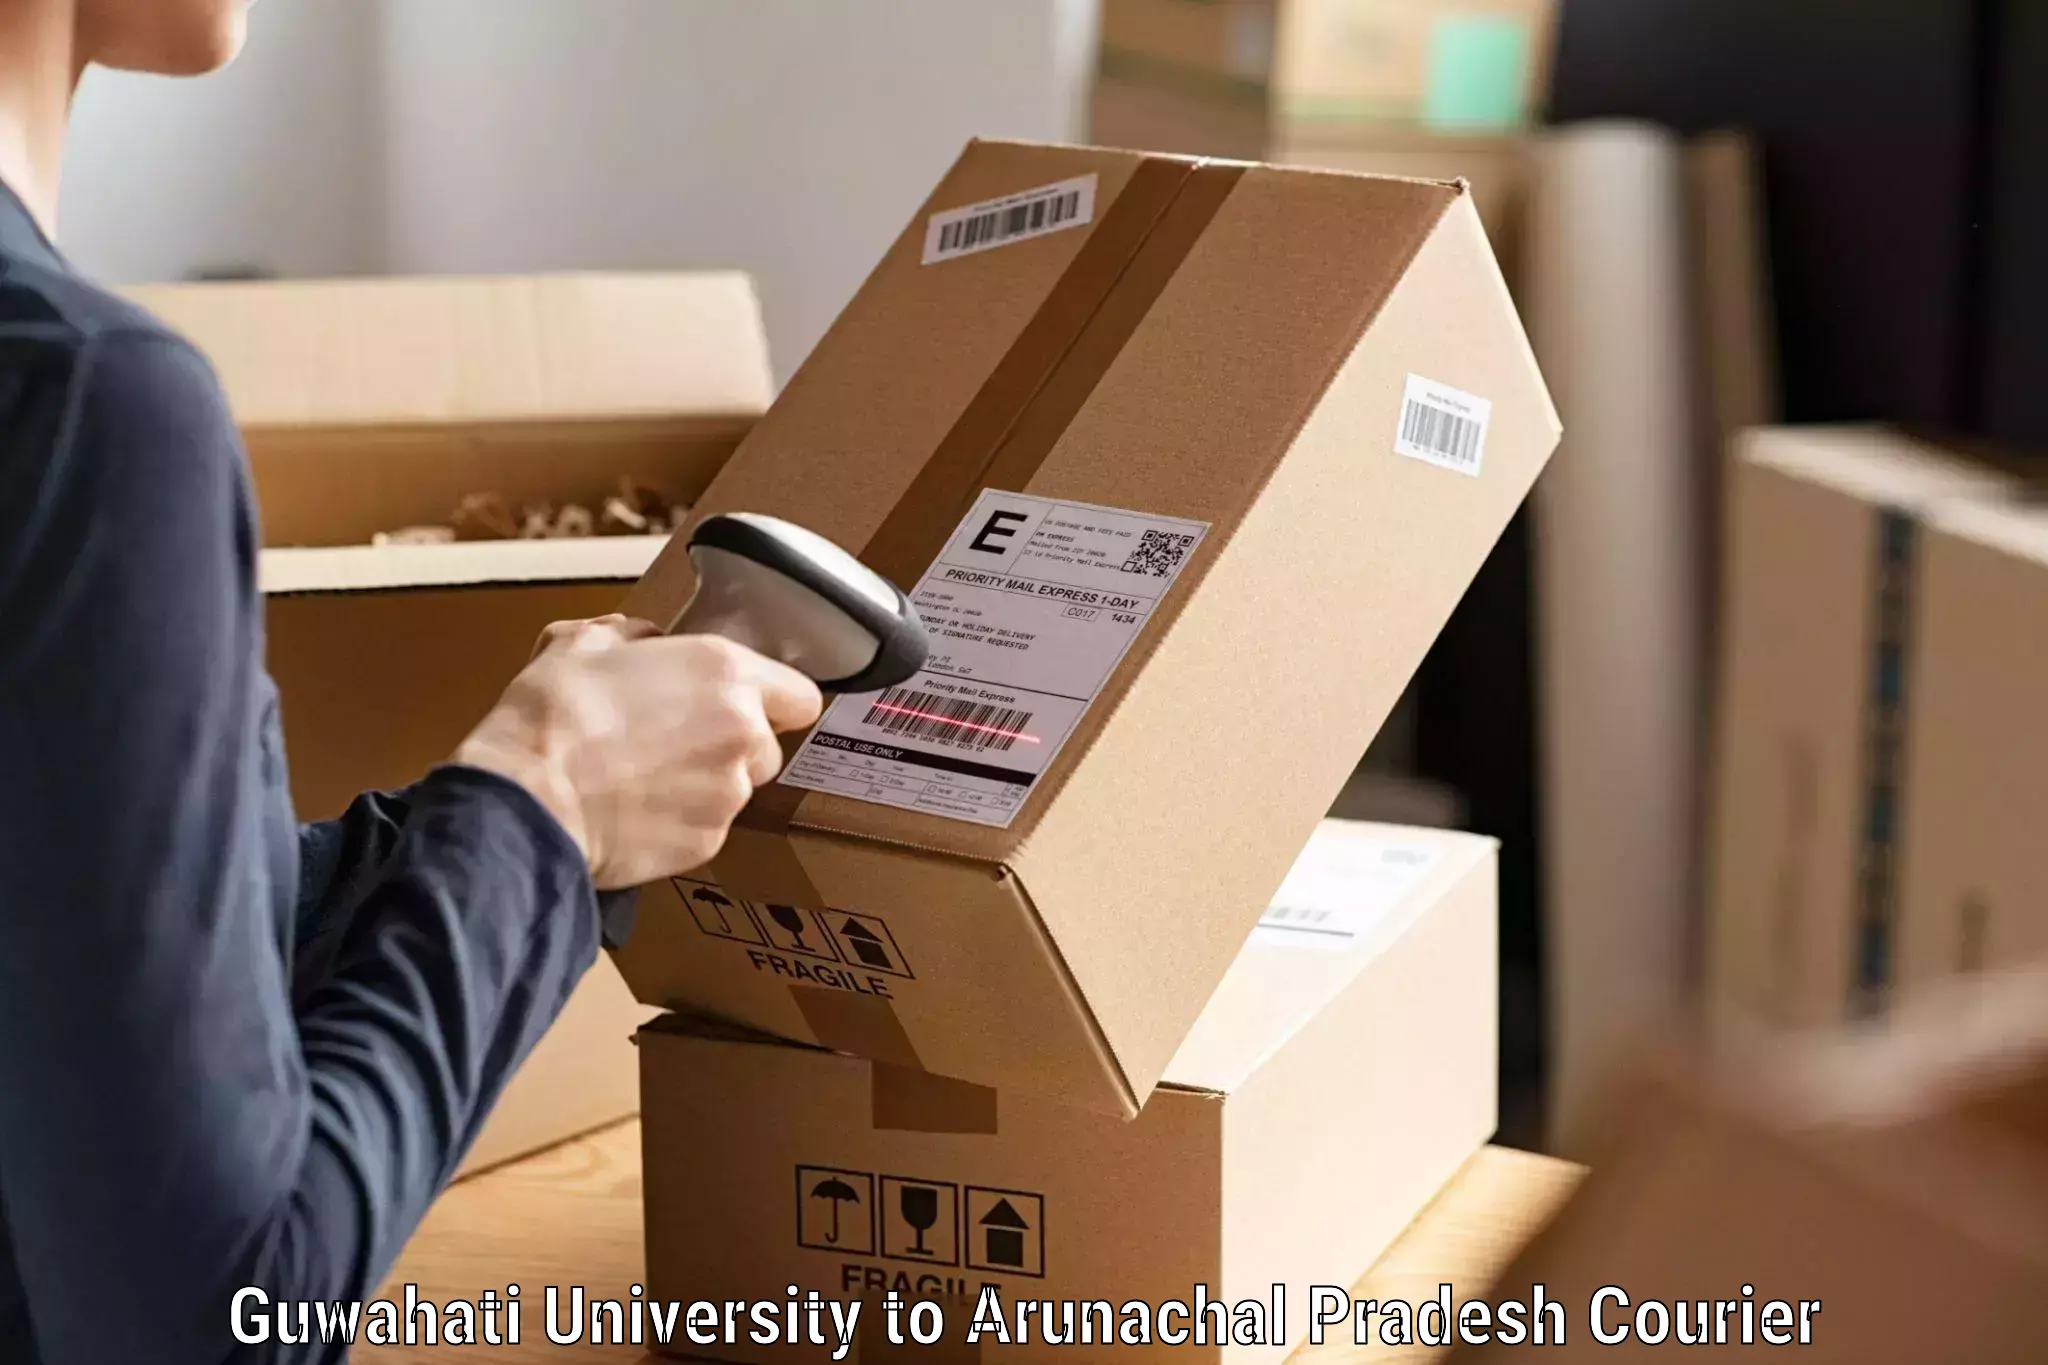 Express delivery solutions Guwahati University to Likabali